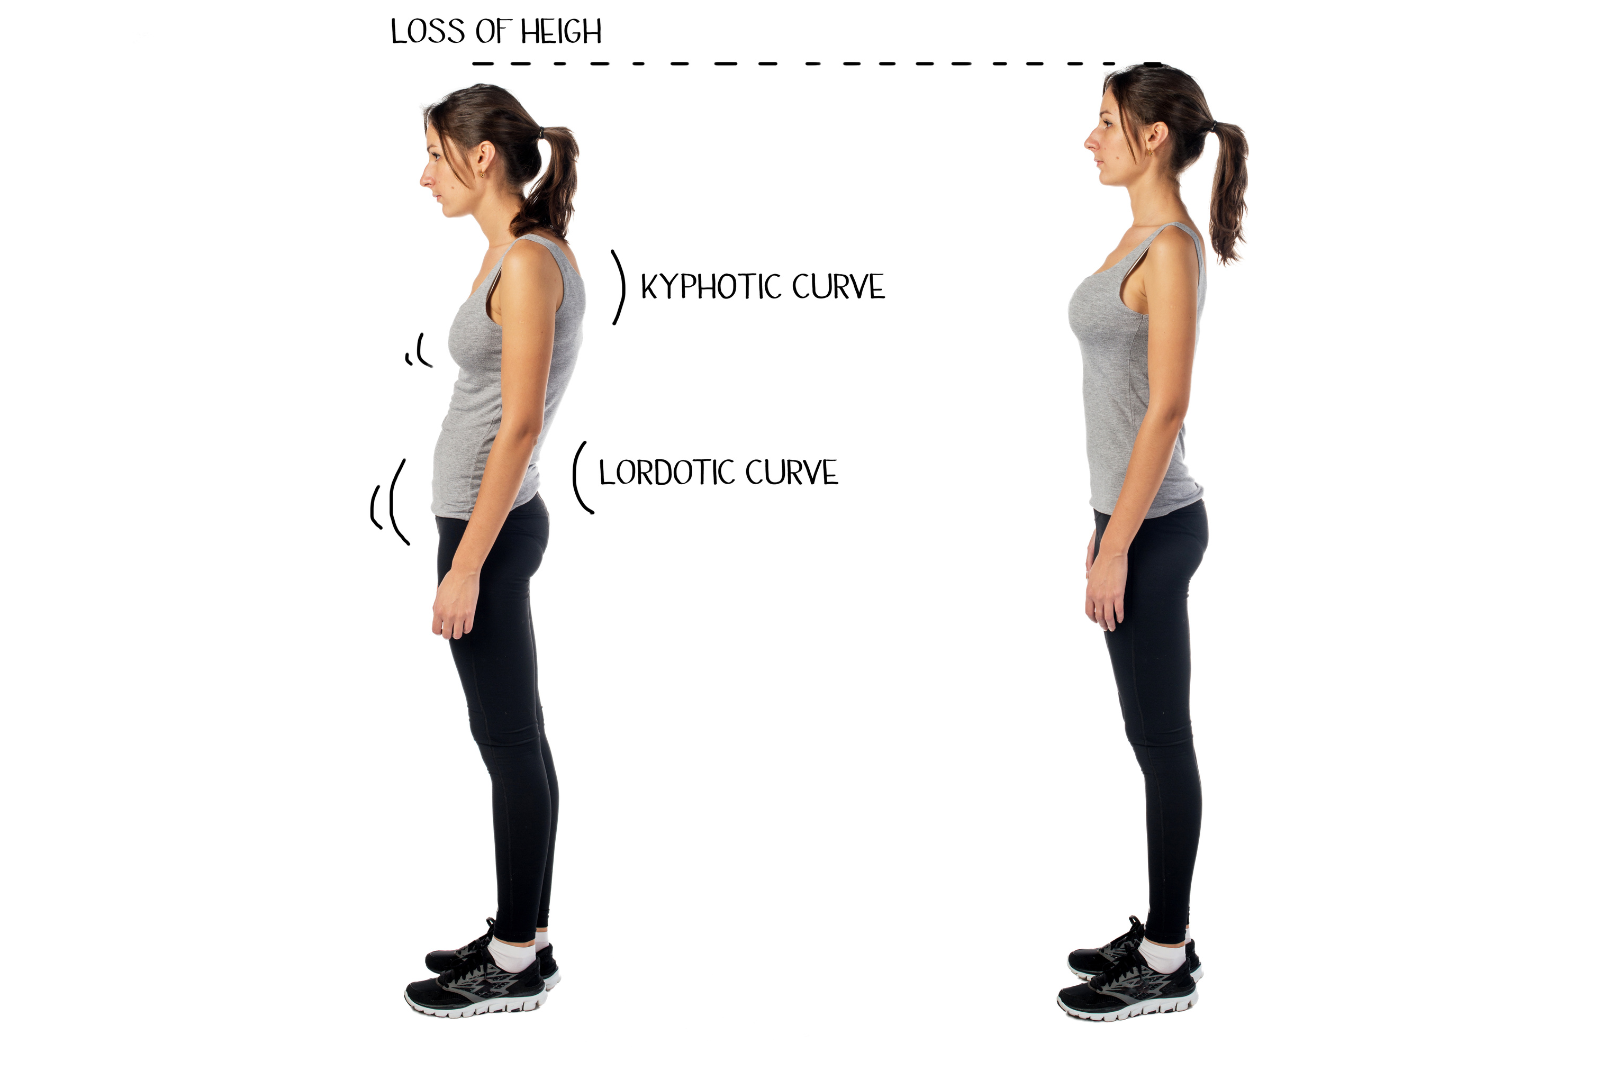 Someone standing with rounded shoulders – “mom posture”